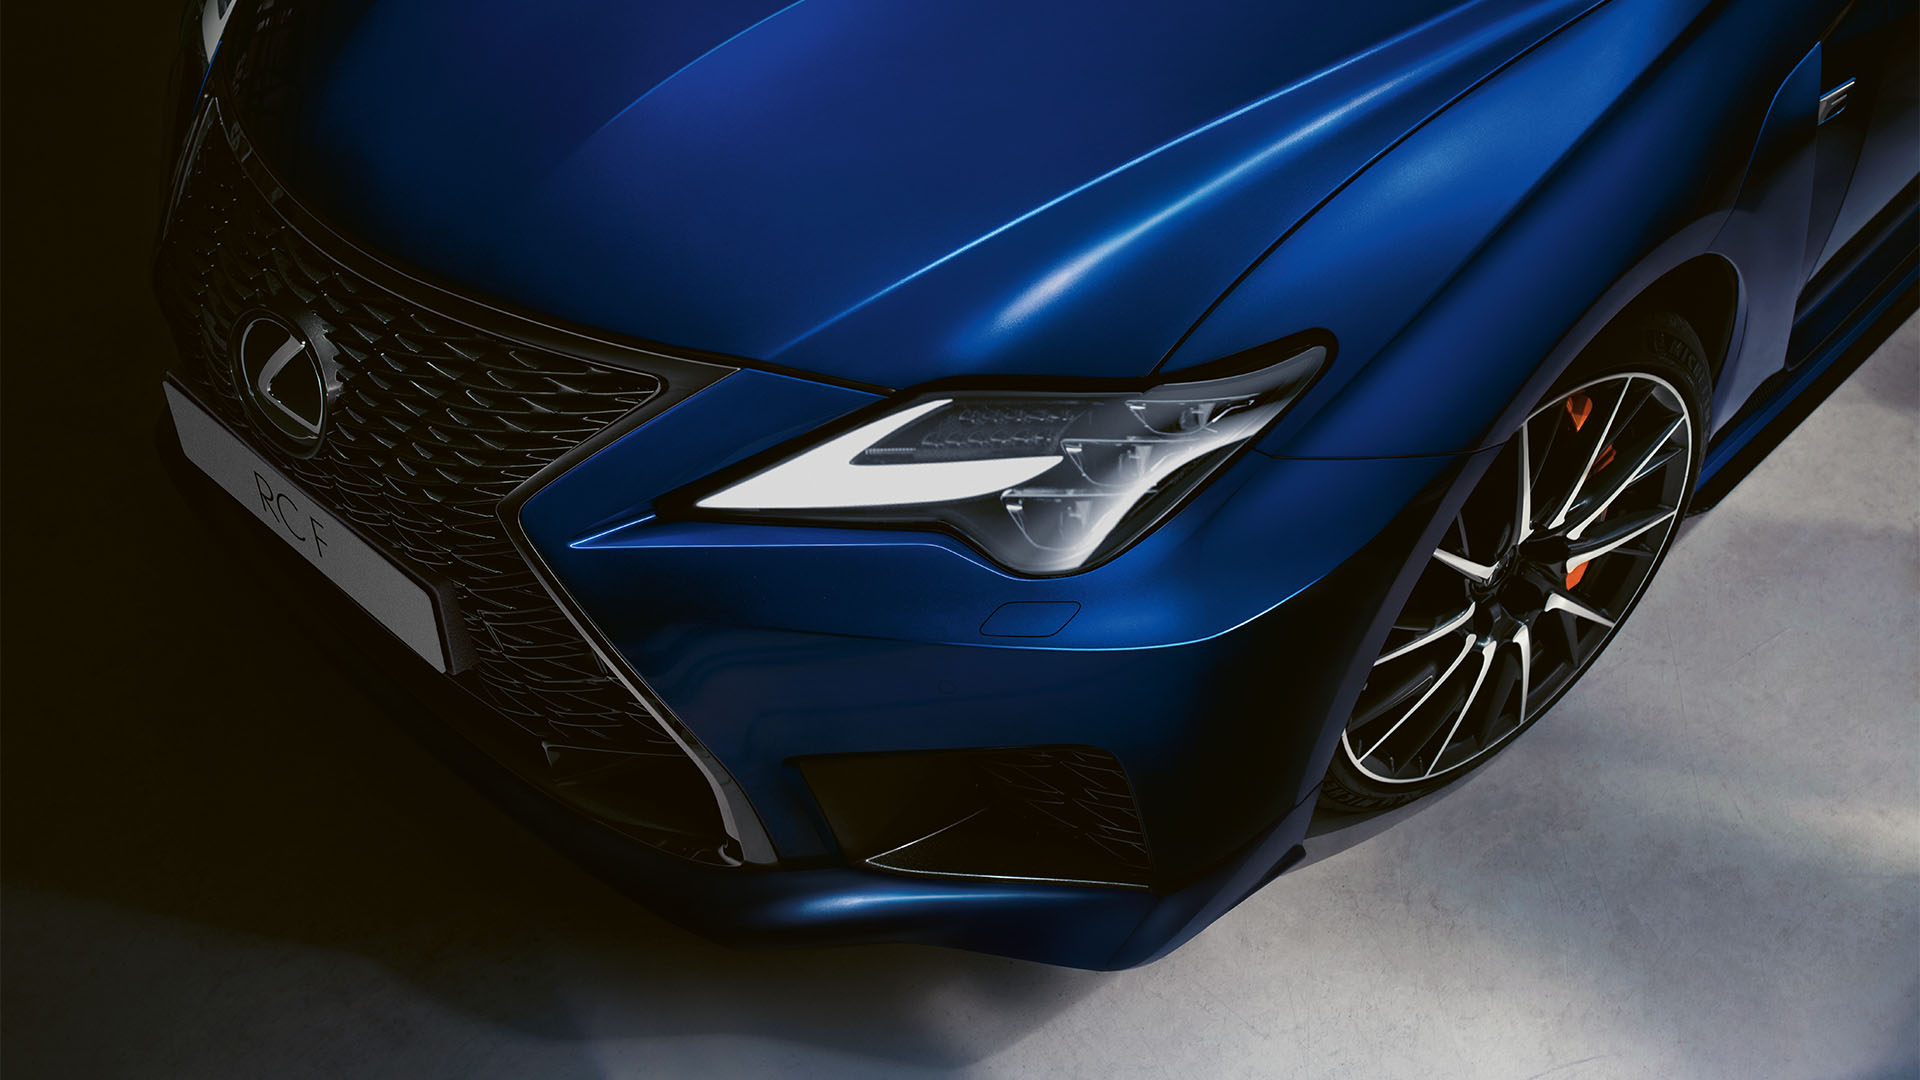 Front close up of the Lexus RC F